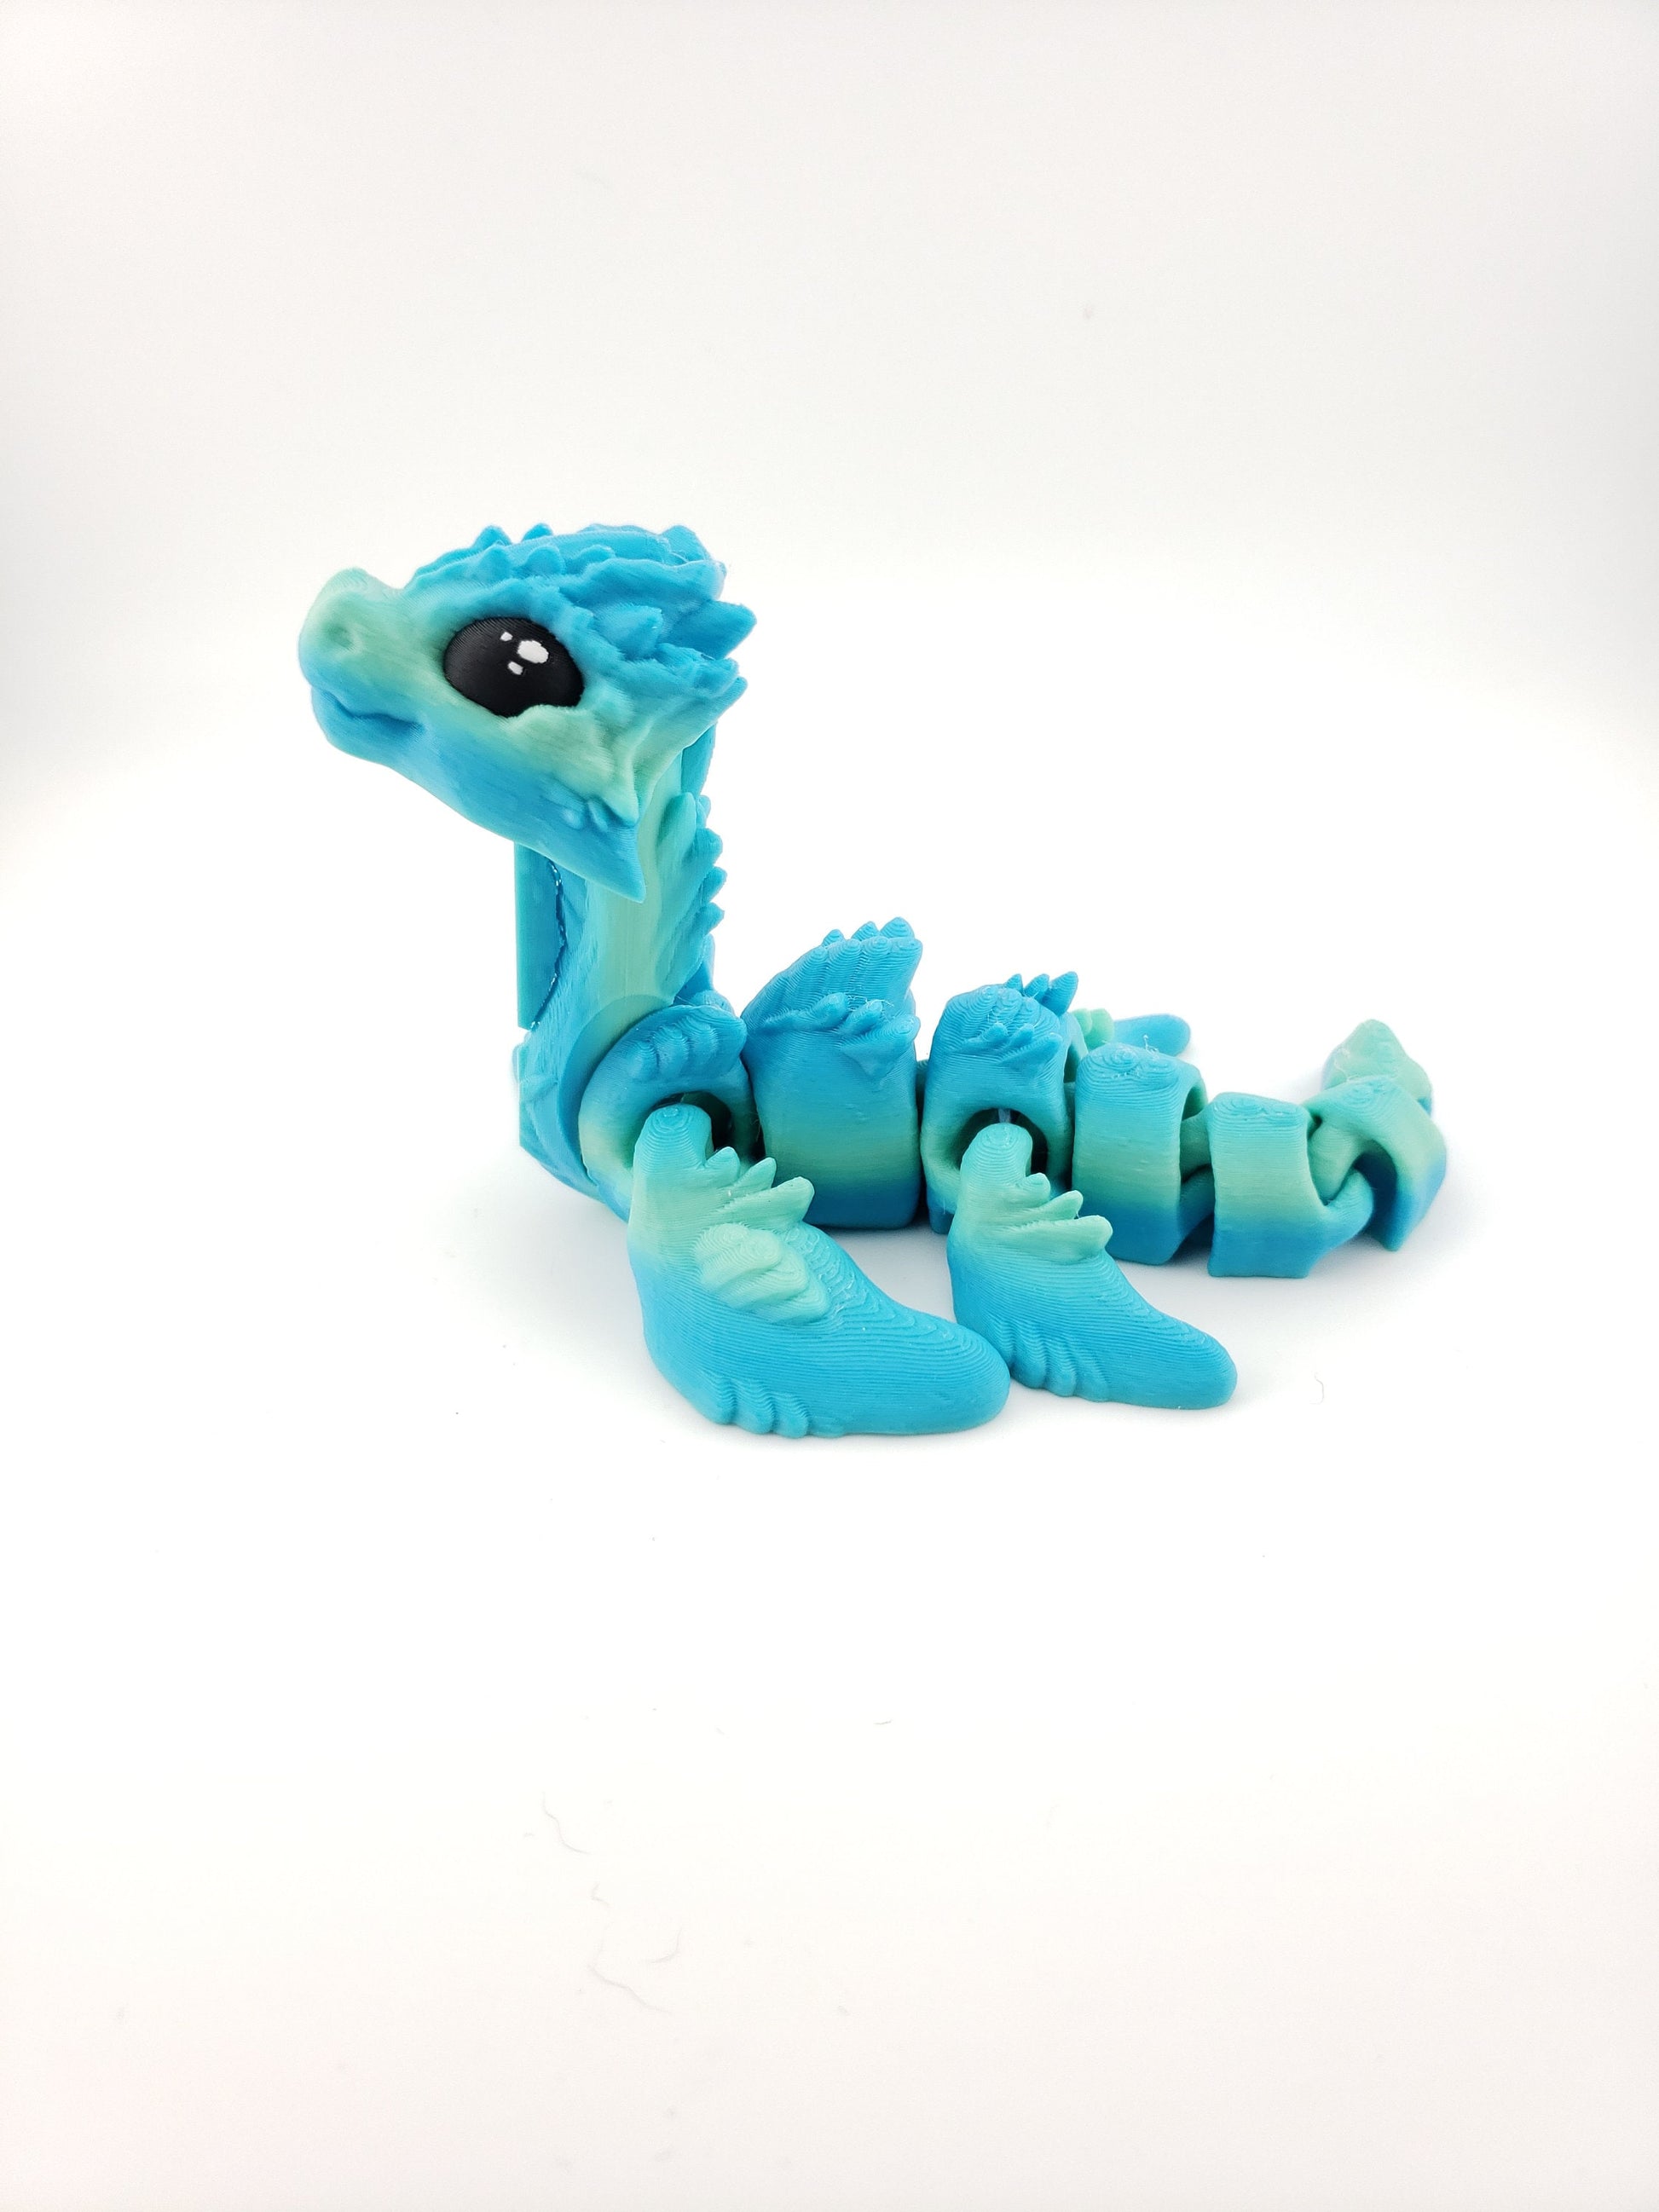 Lochness Monster Lagoona - Sensory Stress Fidget - Articulated - Cinderwing3d - 3D Printed Dragon - Unique Gift